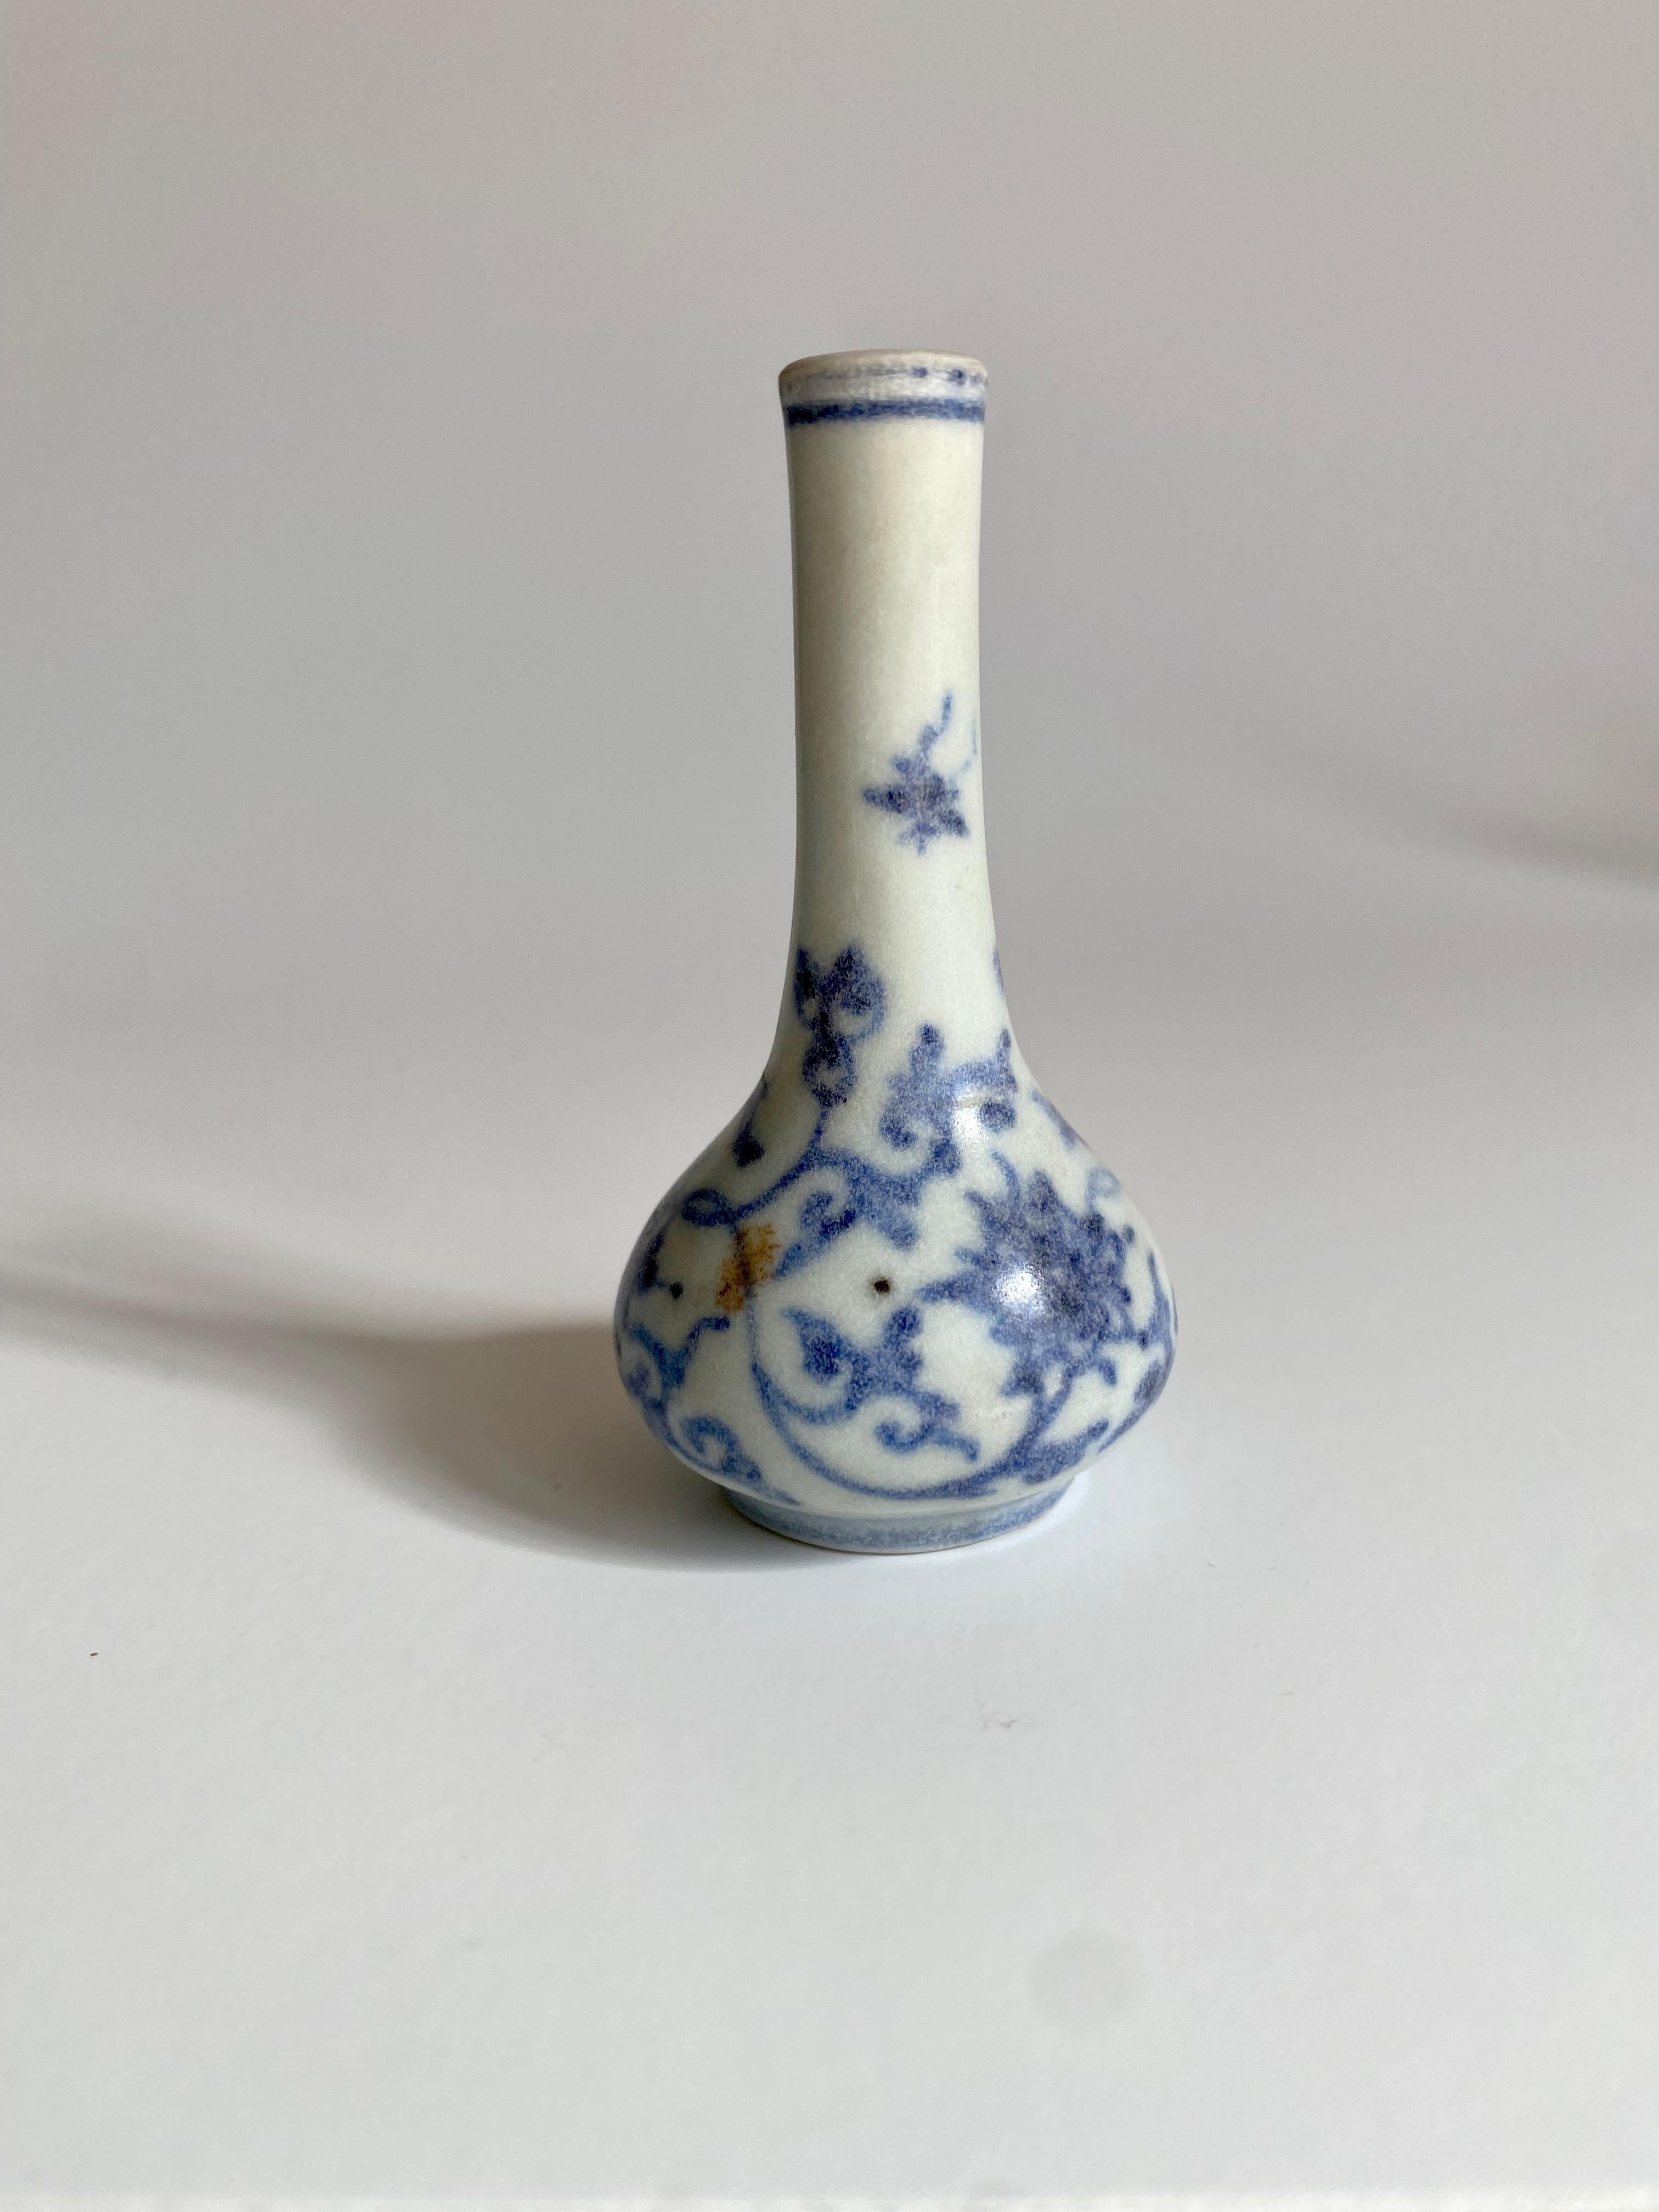 Miniature 17th century blue and white pear-shaped vase decorated with flower garlands.
 
This miniature vase was part of a hoard recovered by Captain Michael Hatcher from the wreck of a ship that sunk in the South China sea in approximately 1643.